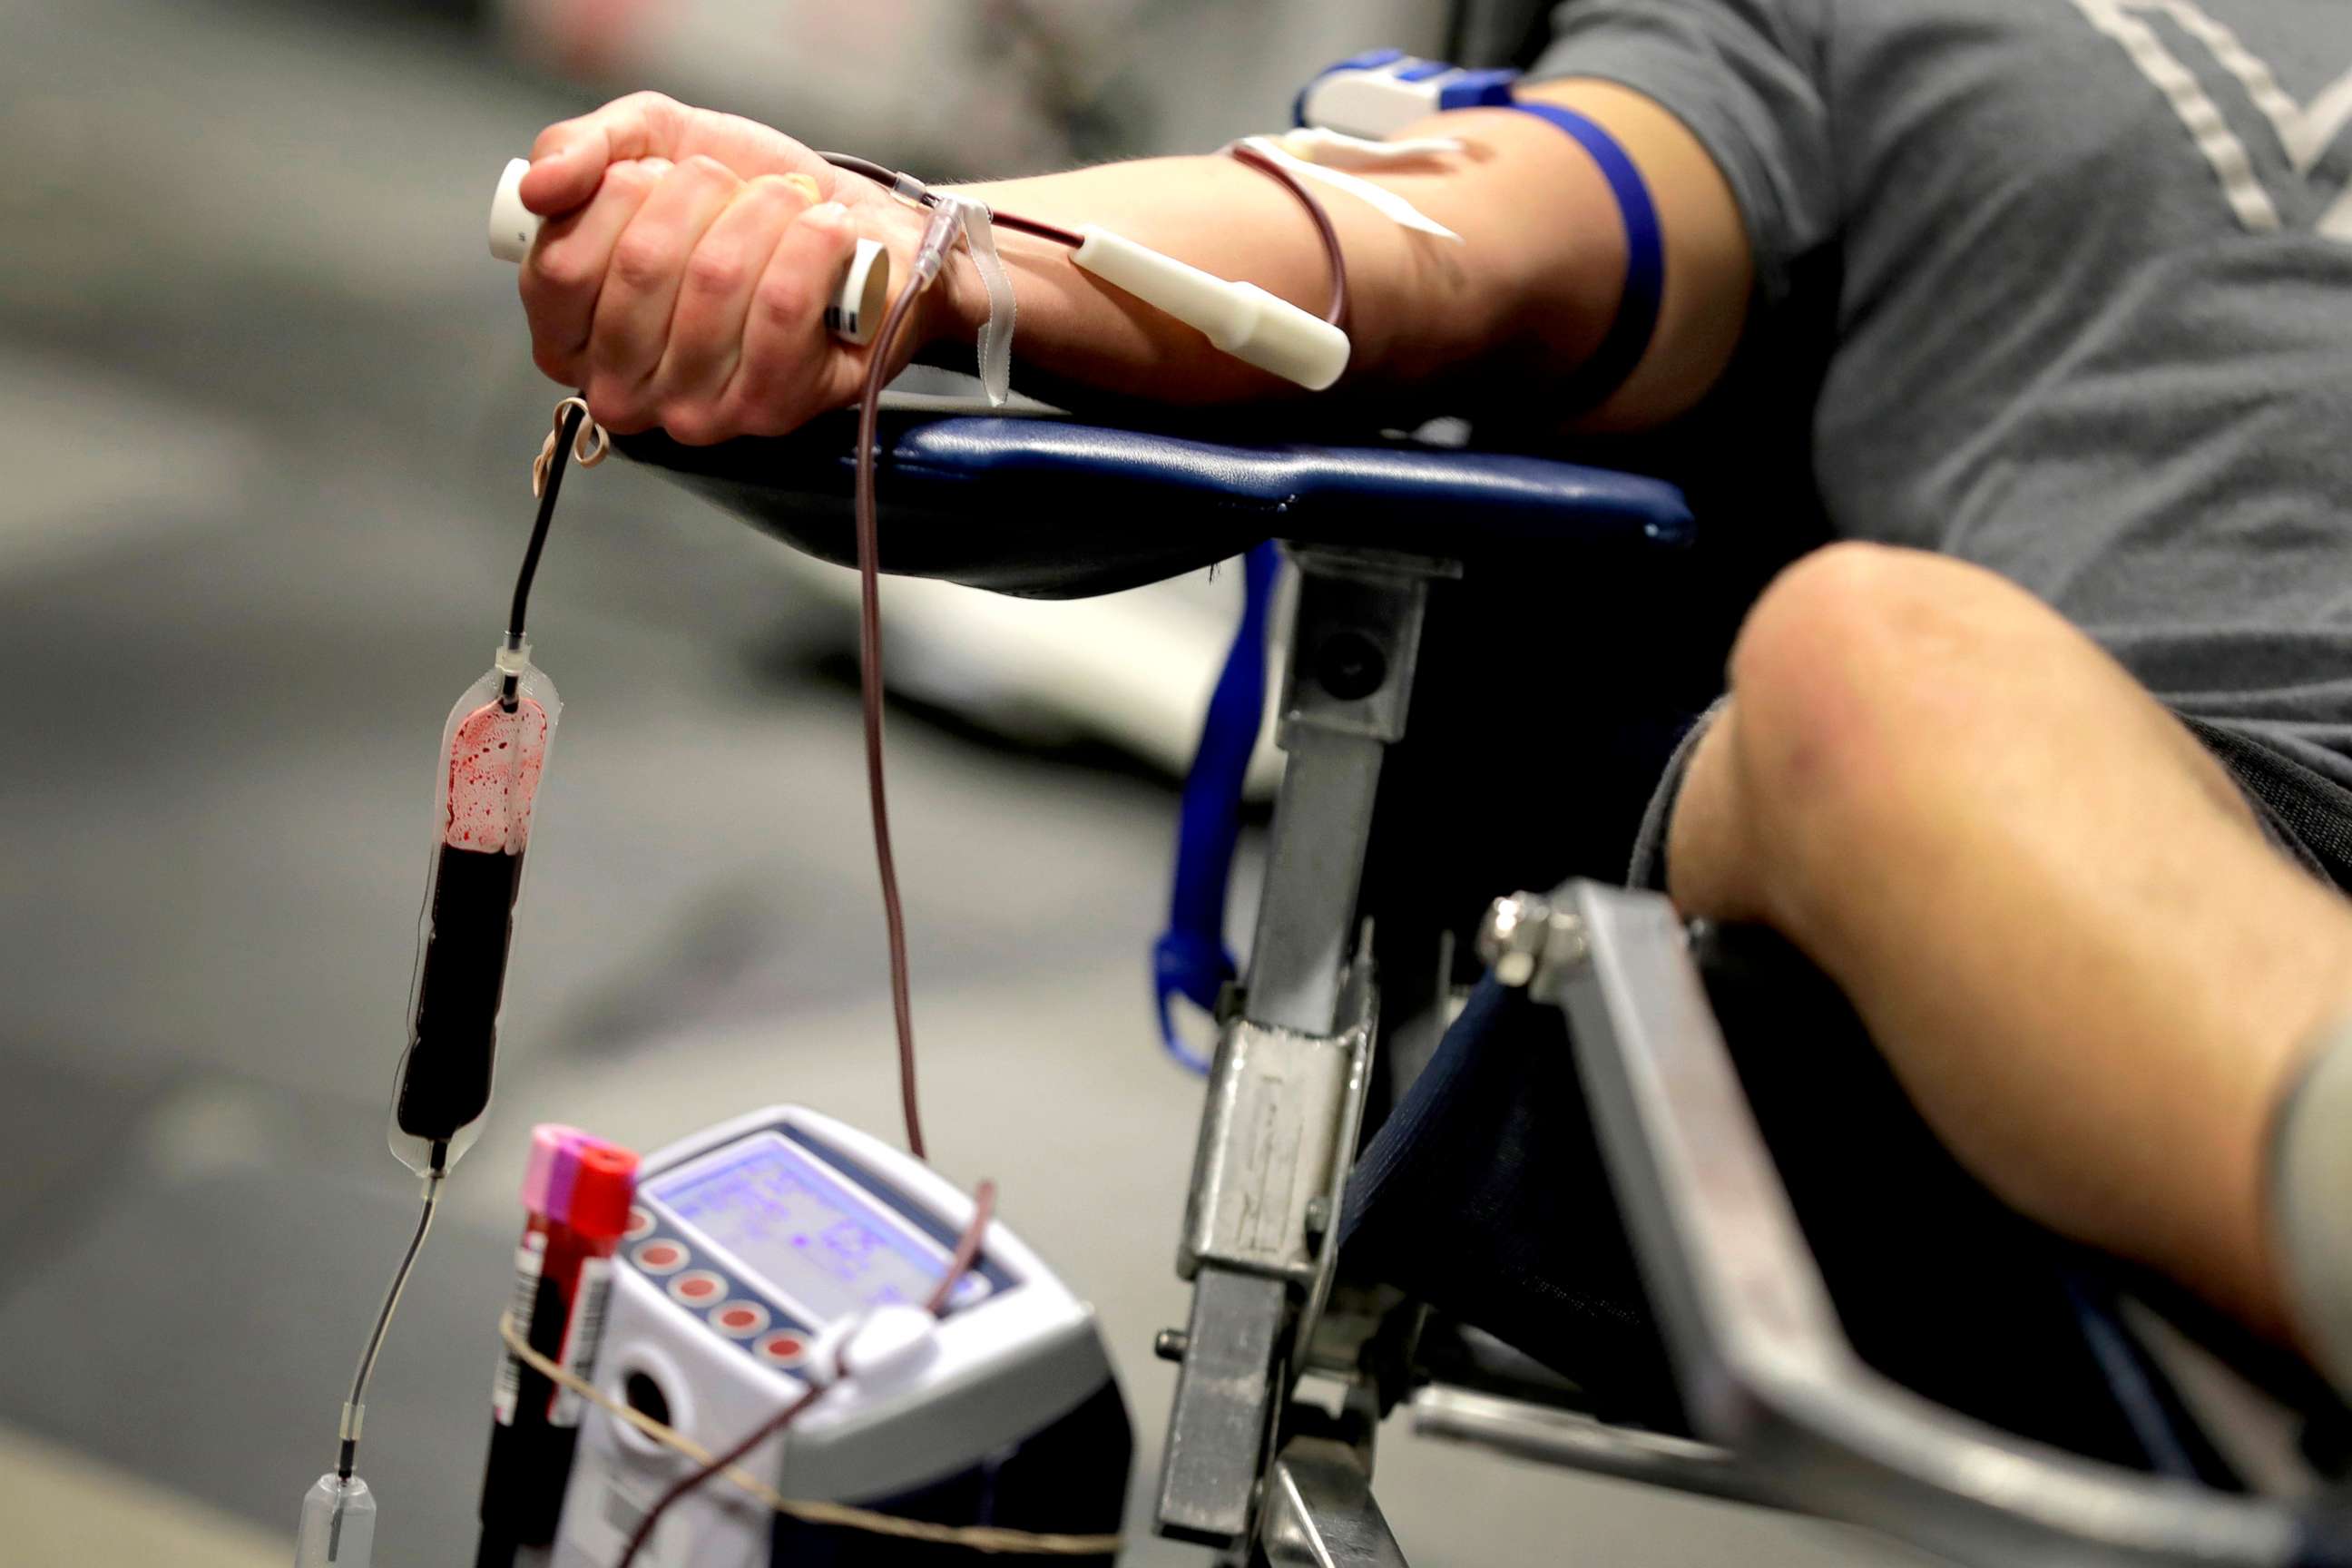 PHOTO: A man donates blood at a temporary blood bank set up in a church's fellowship hall, March 24, 2020, in Tempe, Ariz.